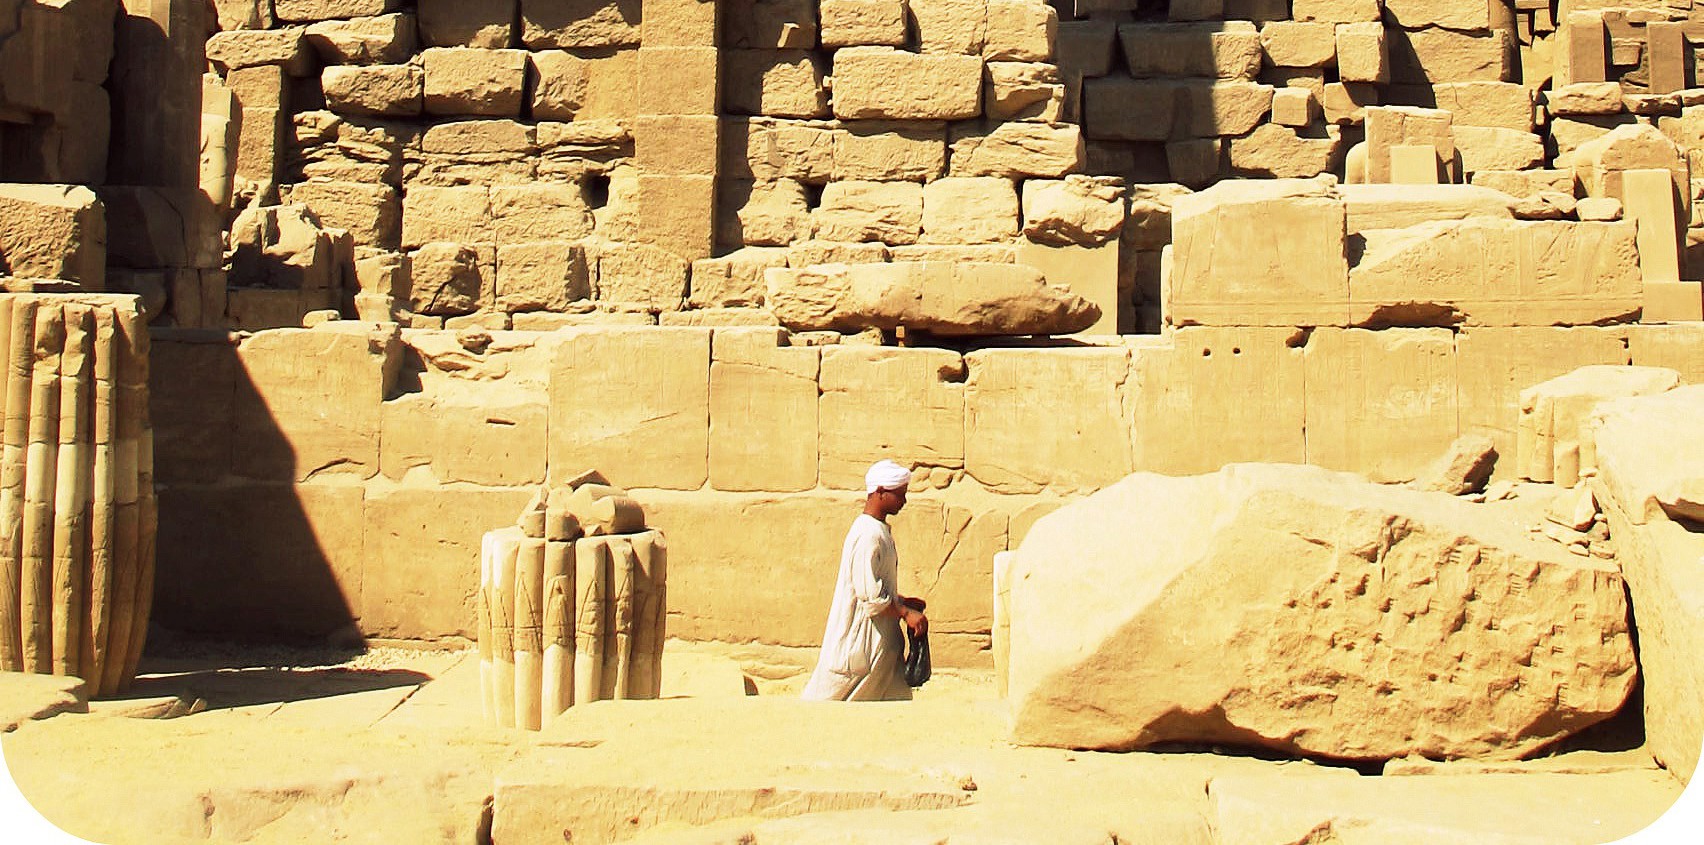 The Karnak Temple Complex - Decayed Temples, Pylons, Chapels and Buildings